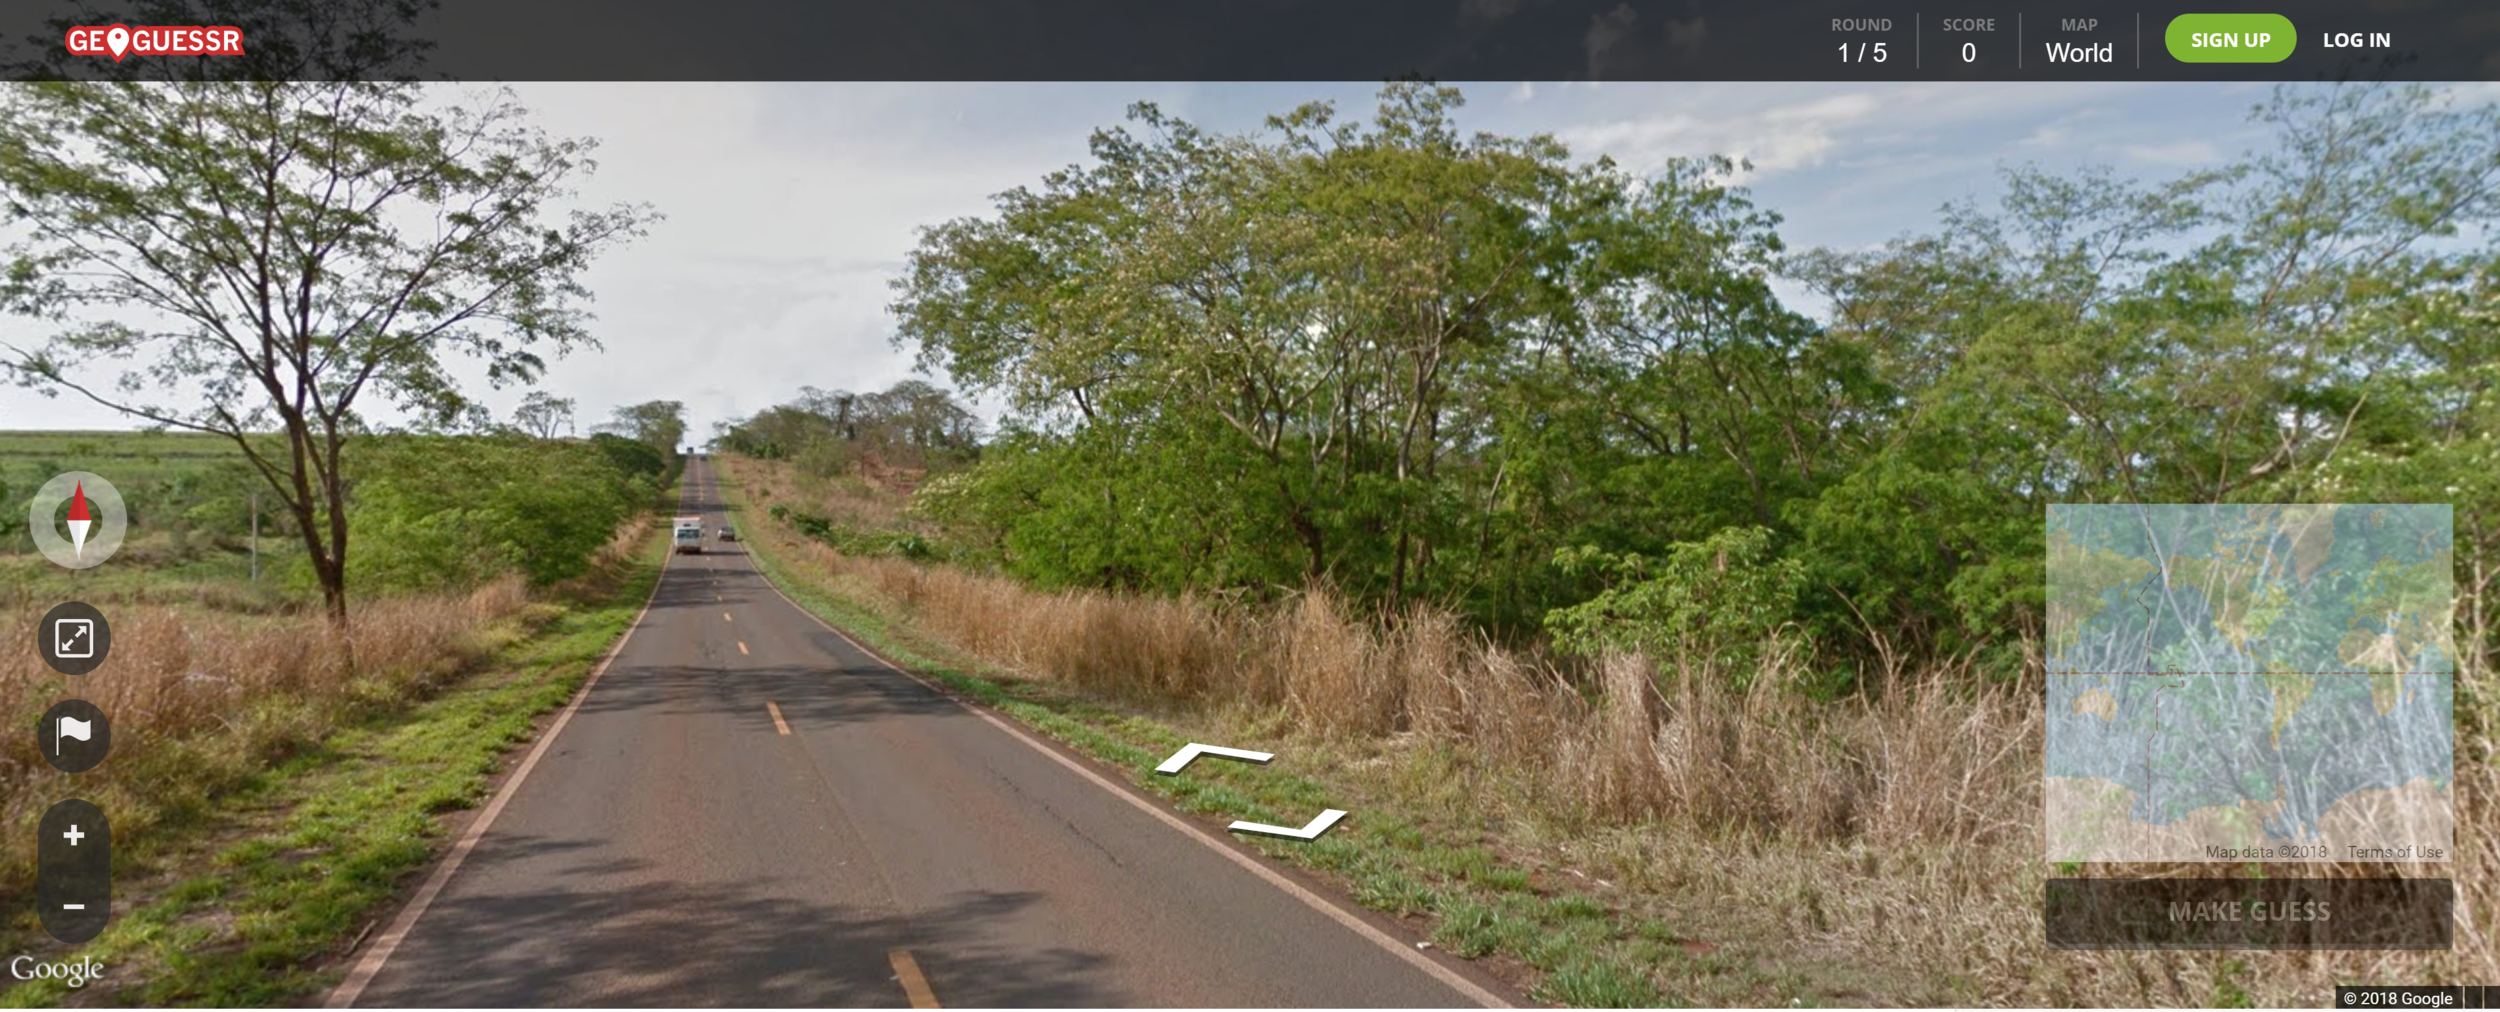 A screenshot from the game GeoGuesser showing a road on Google Maps